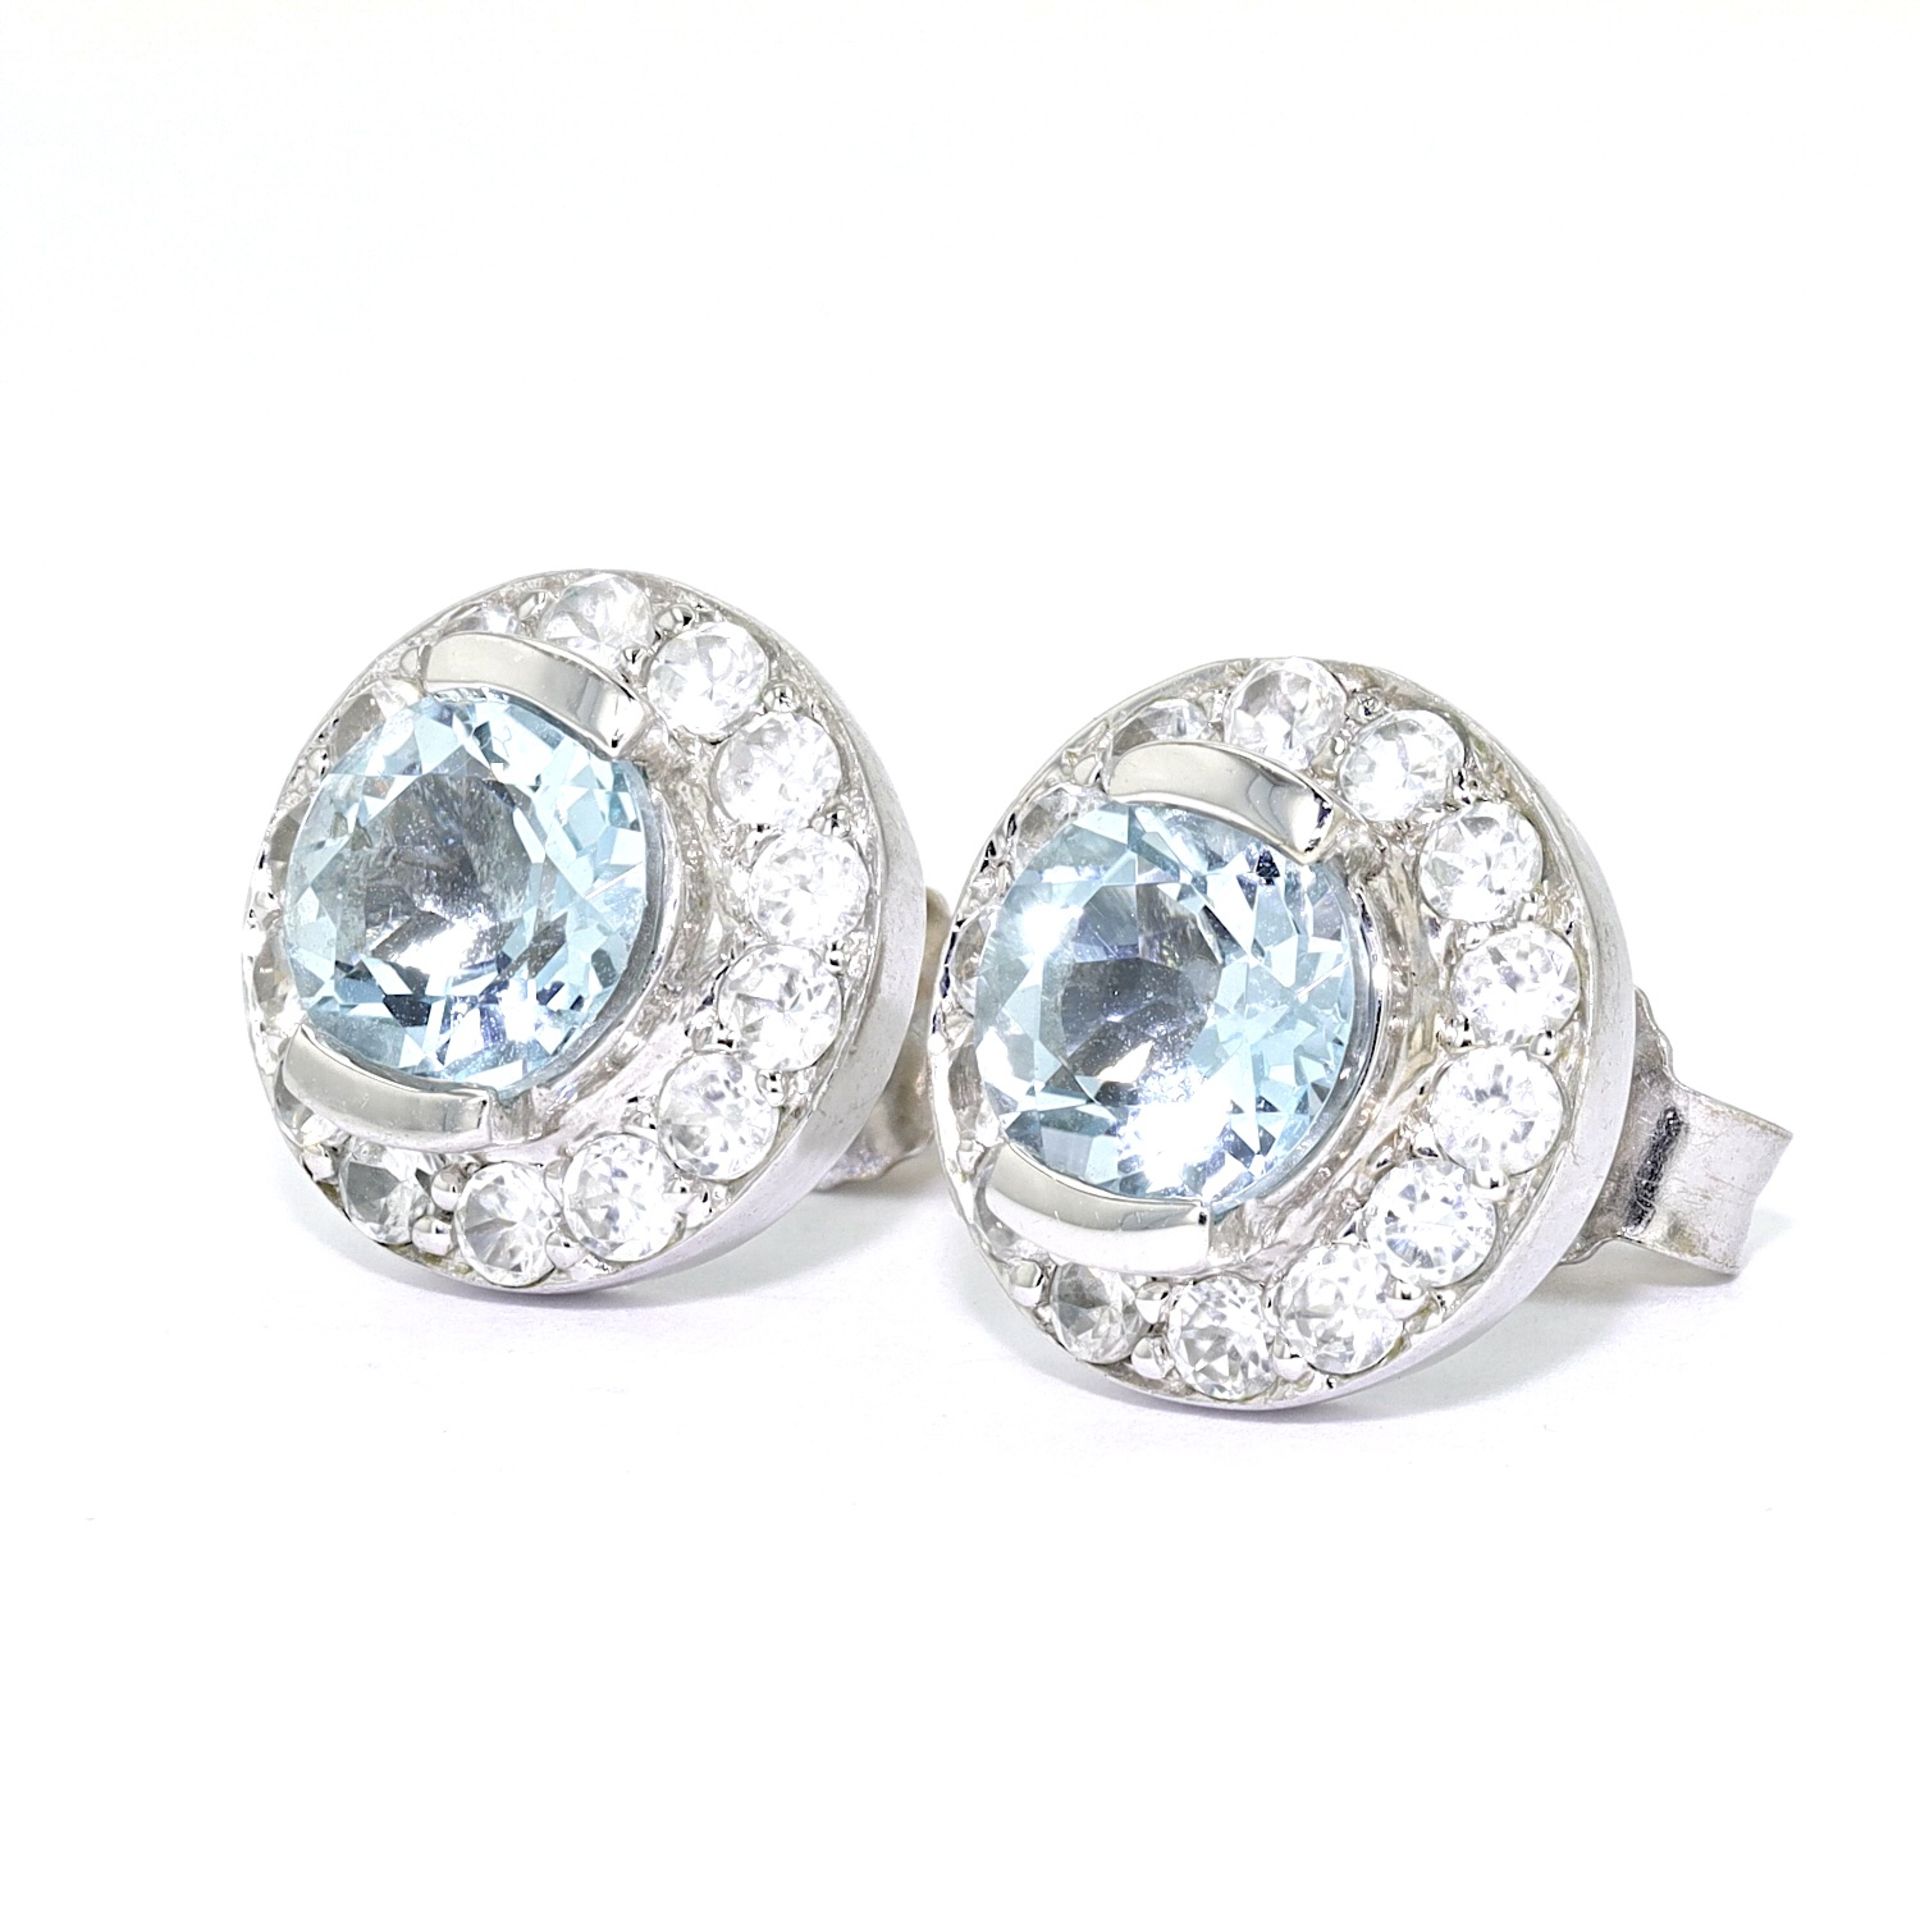 1 pair of stud earrings with topazes and zirconia - Image 2 of 4